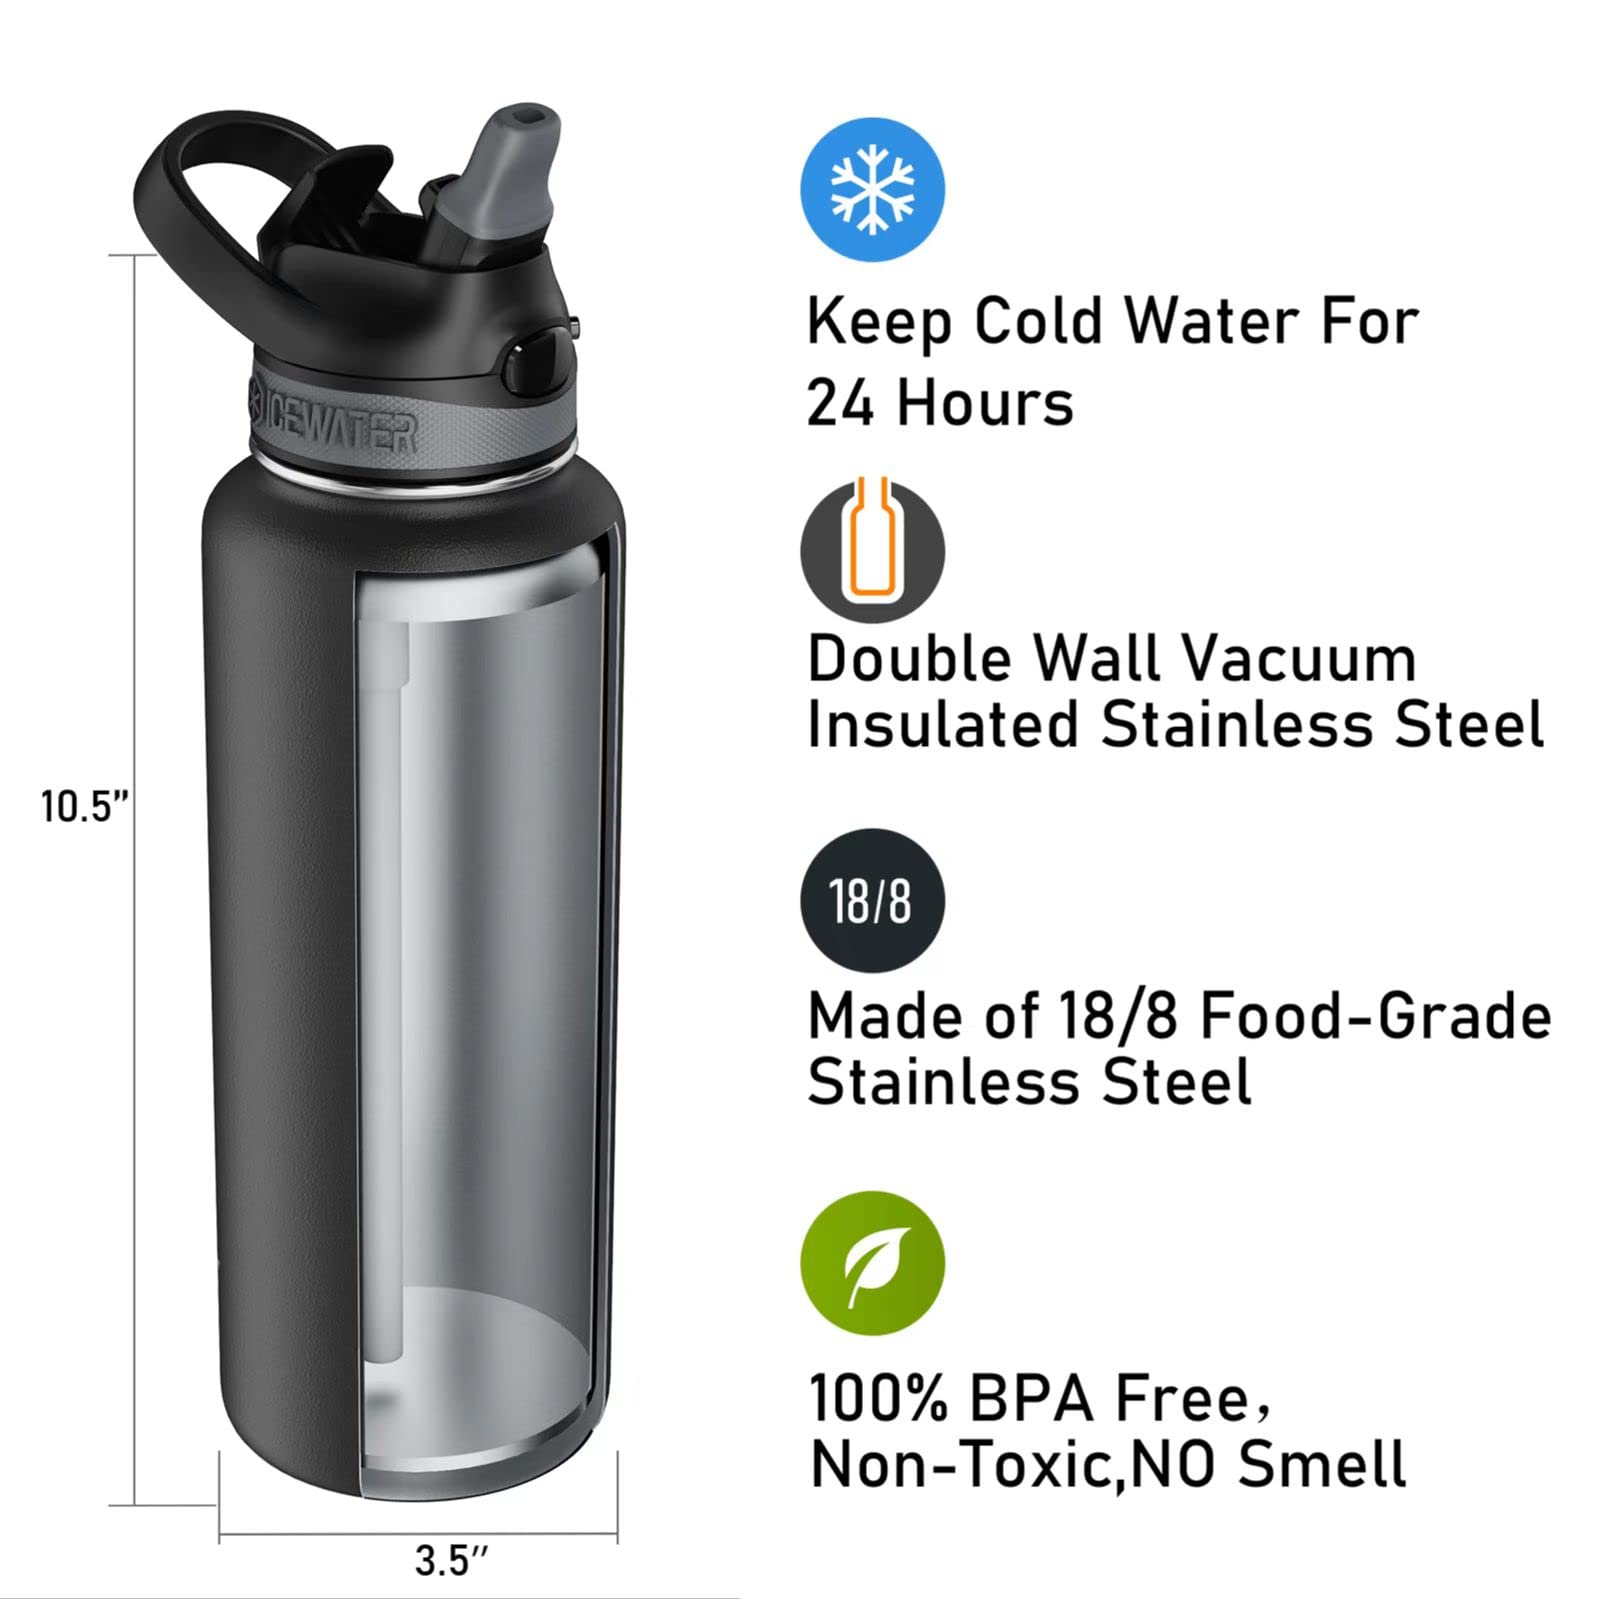 ICEWATER-40 Oz Stainless Steel Water Bottle With Soft Auto Straw & Wide Mouth Lids, Double Walled Vacuum, Mouthpiece DustProof, Lock Feature, Pop-up Tops, One-handed Operation (40 Oz, Black)